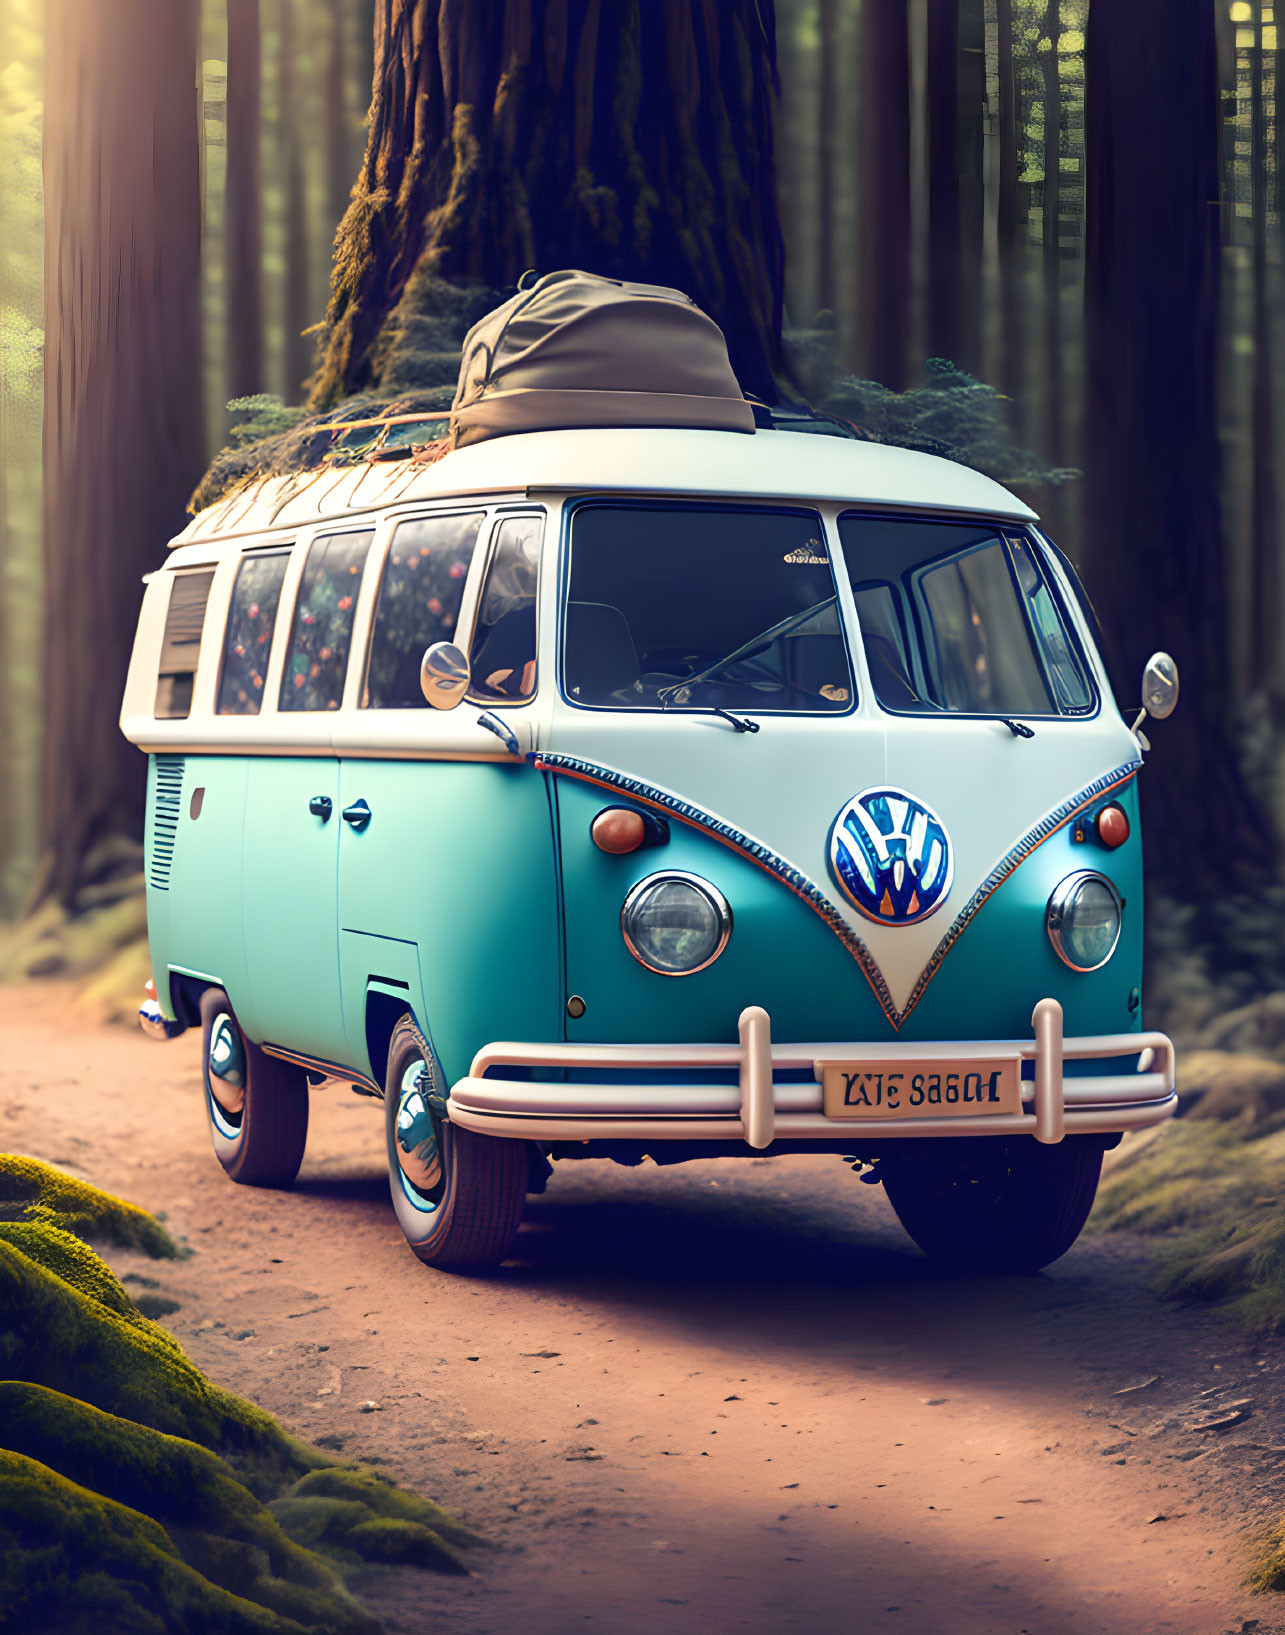 Vintage Blue Volkswagen Van Parked on Forest Path with Sunlight Filtering Through Trees